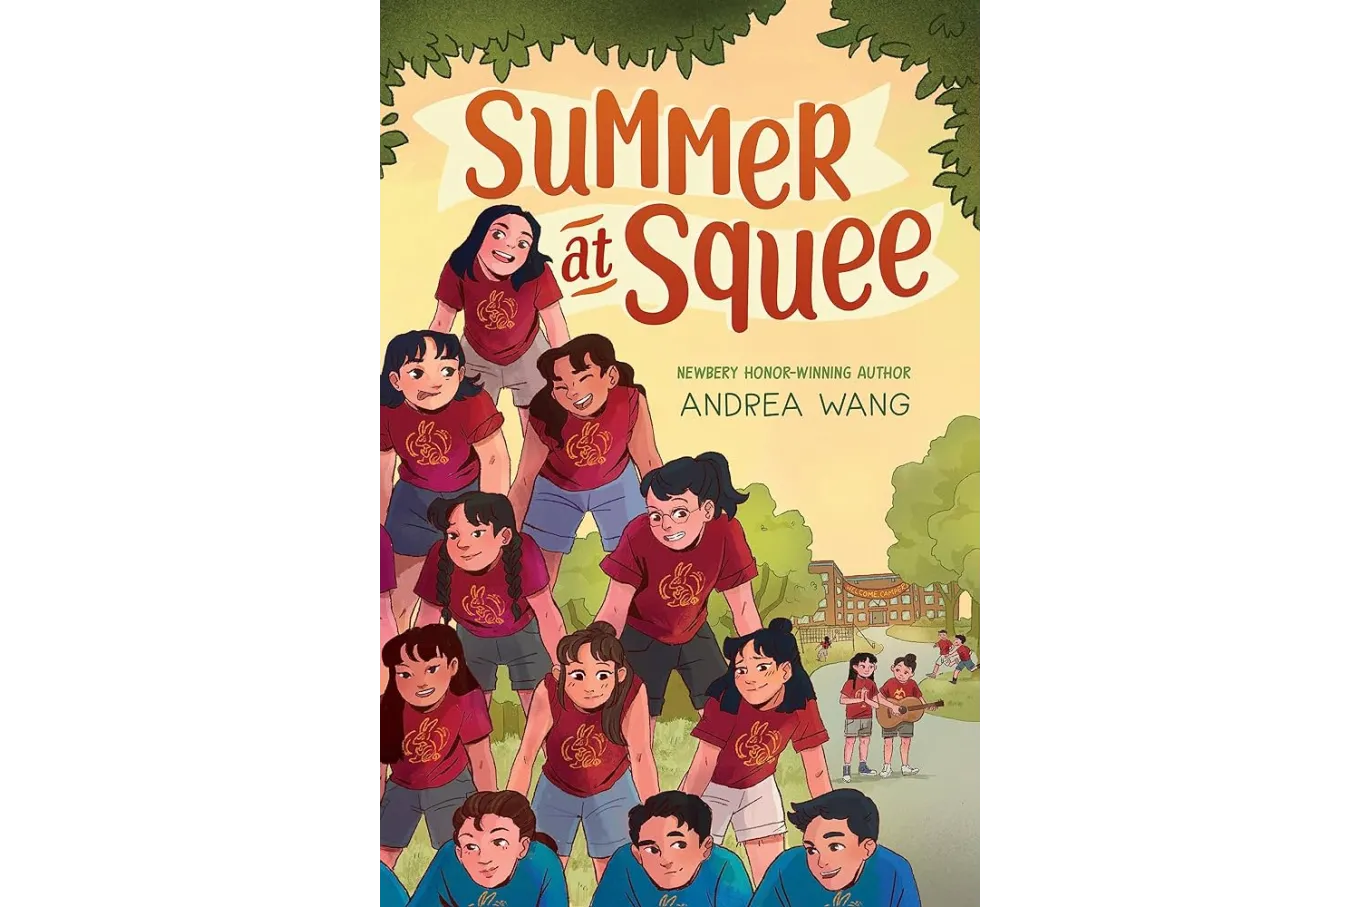 Cover of Summer at Squee